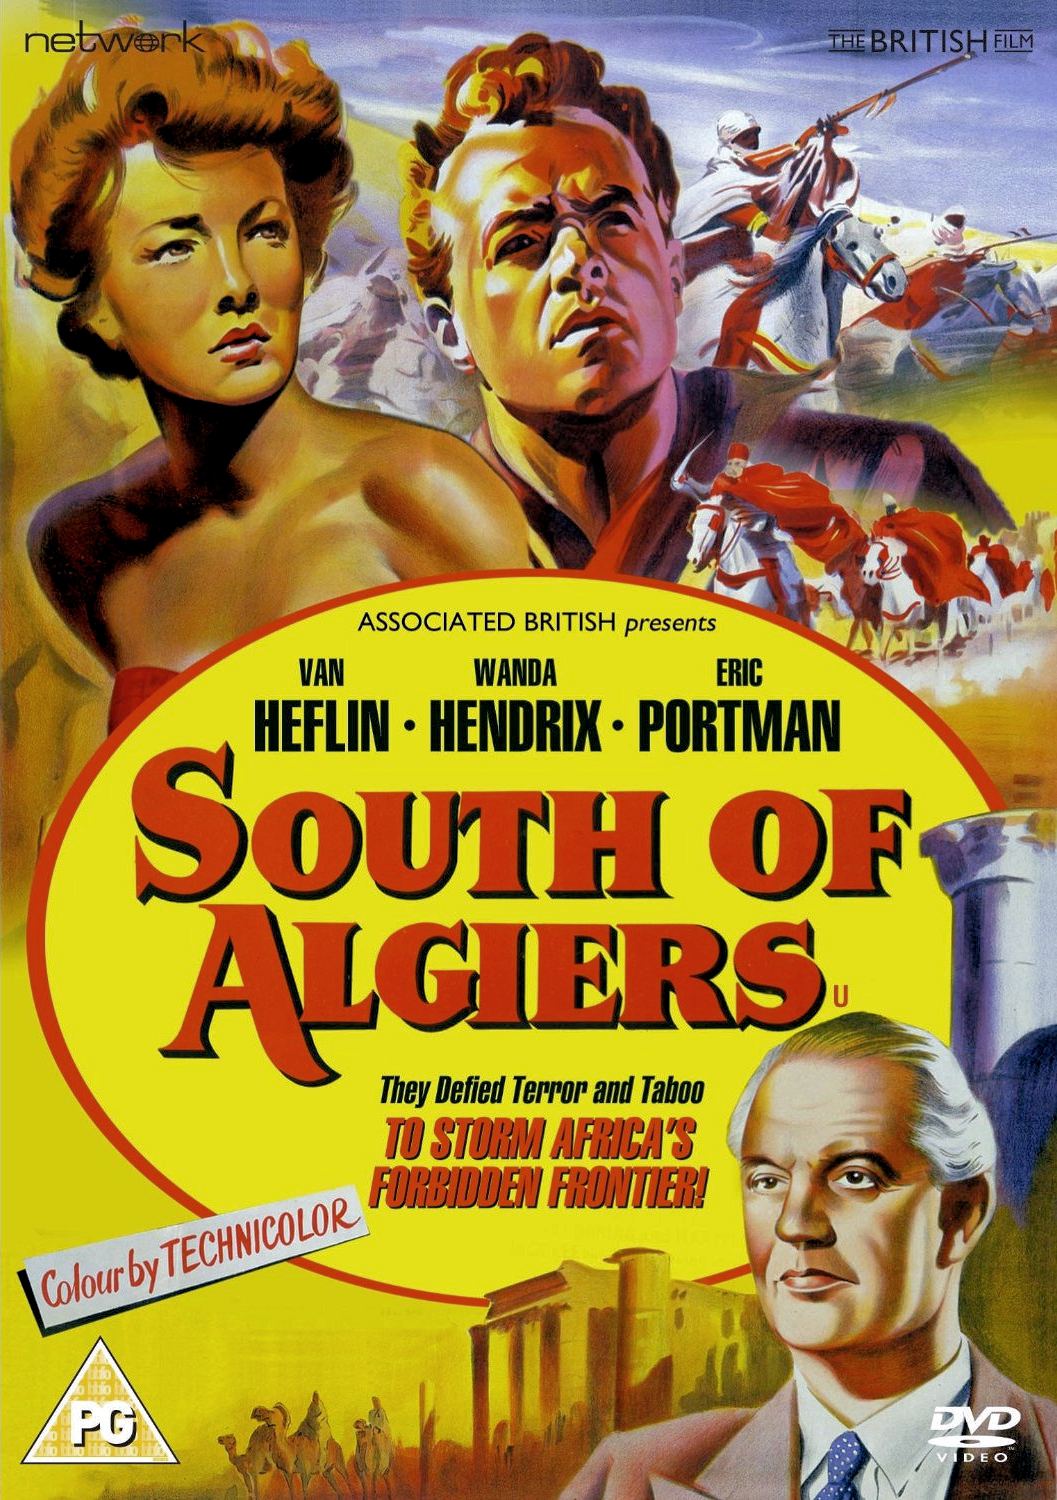 South of Algiers DVD from Network and The British Film.  Features Wanda Hendrix as Anne Burnet, Van Heflin as Nicholas Chapman and Eric Portman as Doctor Burnet